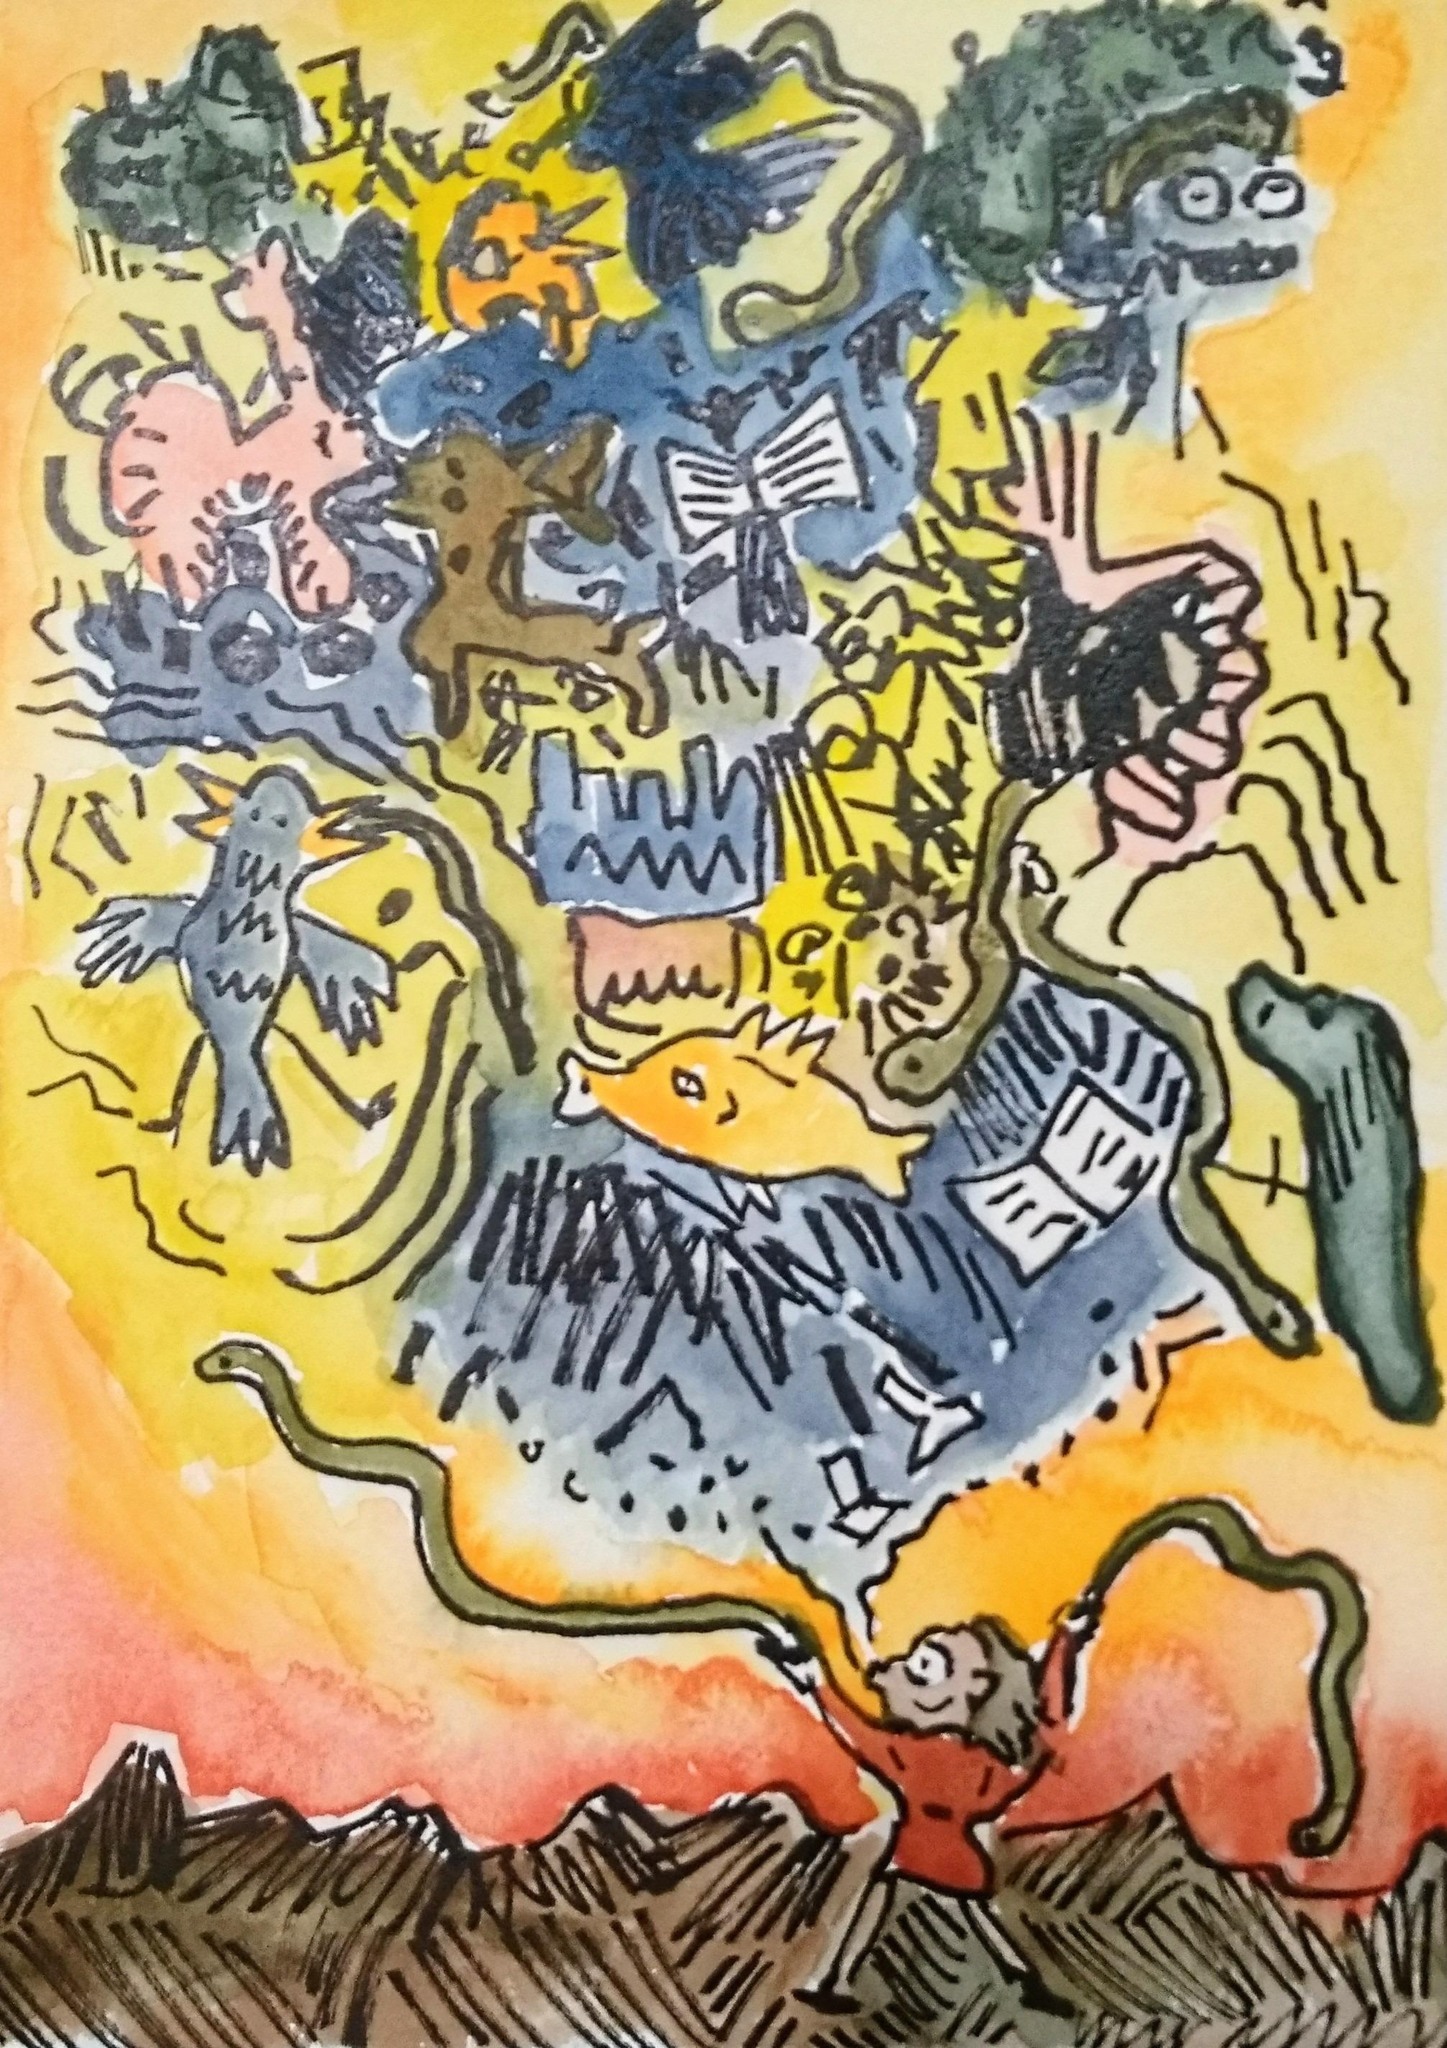 cartoony drawing with red, orange and blue watercolor and a woman slinging snakes while sucking the sludge from the void.